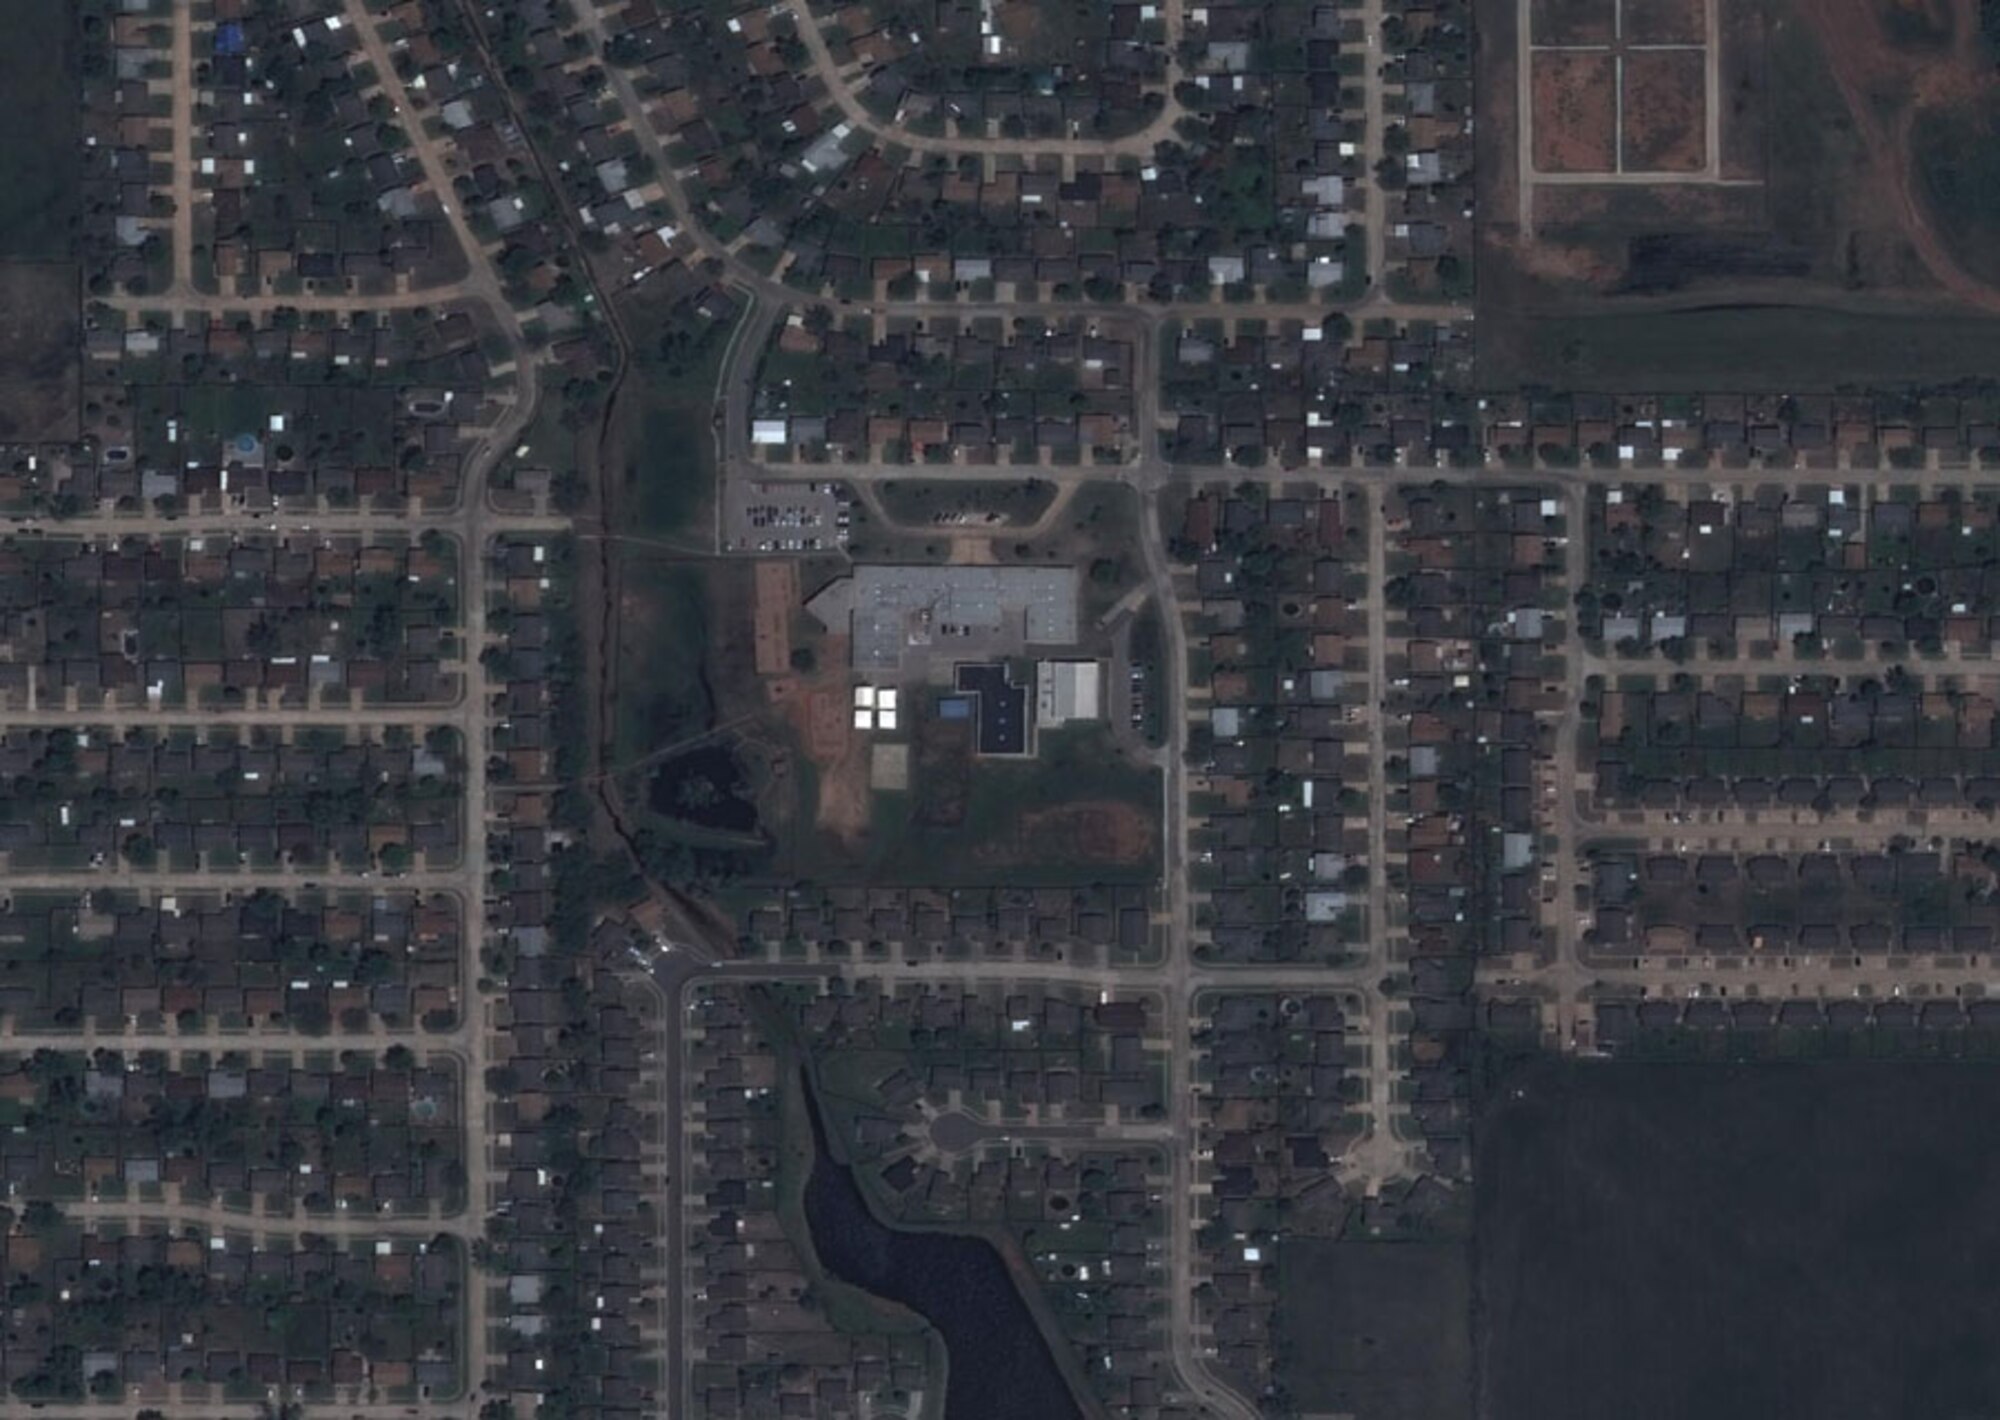 HANSCOM AIR FORCE BASE, Mass. - Satellite imagery captured by Hanscom's Eagle Vision program shows the town of Moore, Okla., with the Plaza Towers Elementary School in the center, before the May 22 tornado that devastated the region. The next image shows the same area following the tornado. This imagery can be used by first responders for disaster relief efforts. The program office is conducting a cost-savings review to find savings within the program while ensuring the imagery would still be available when needed. (Courtesy image)
